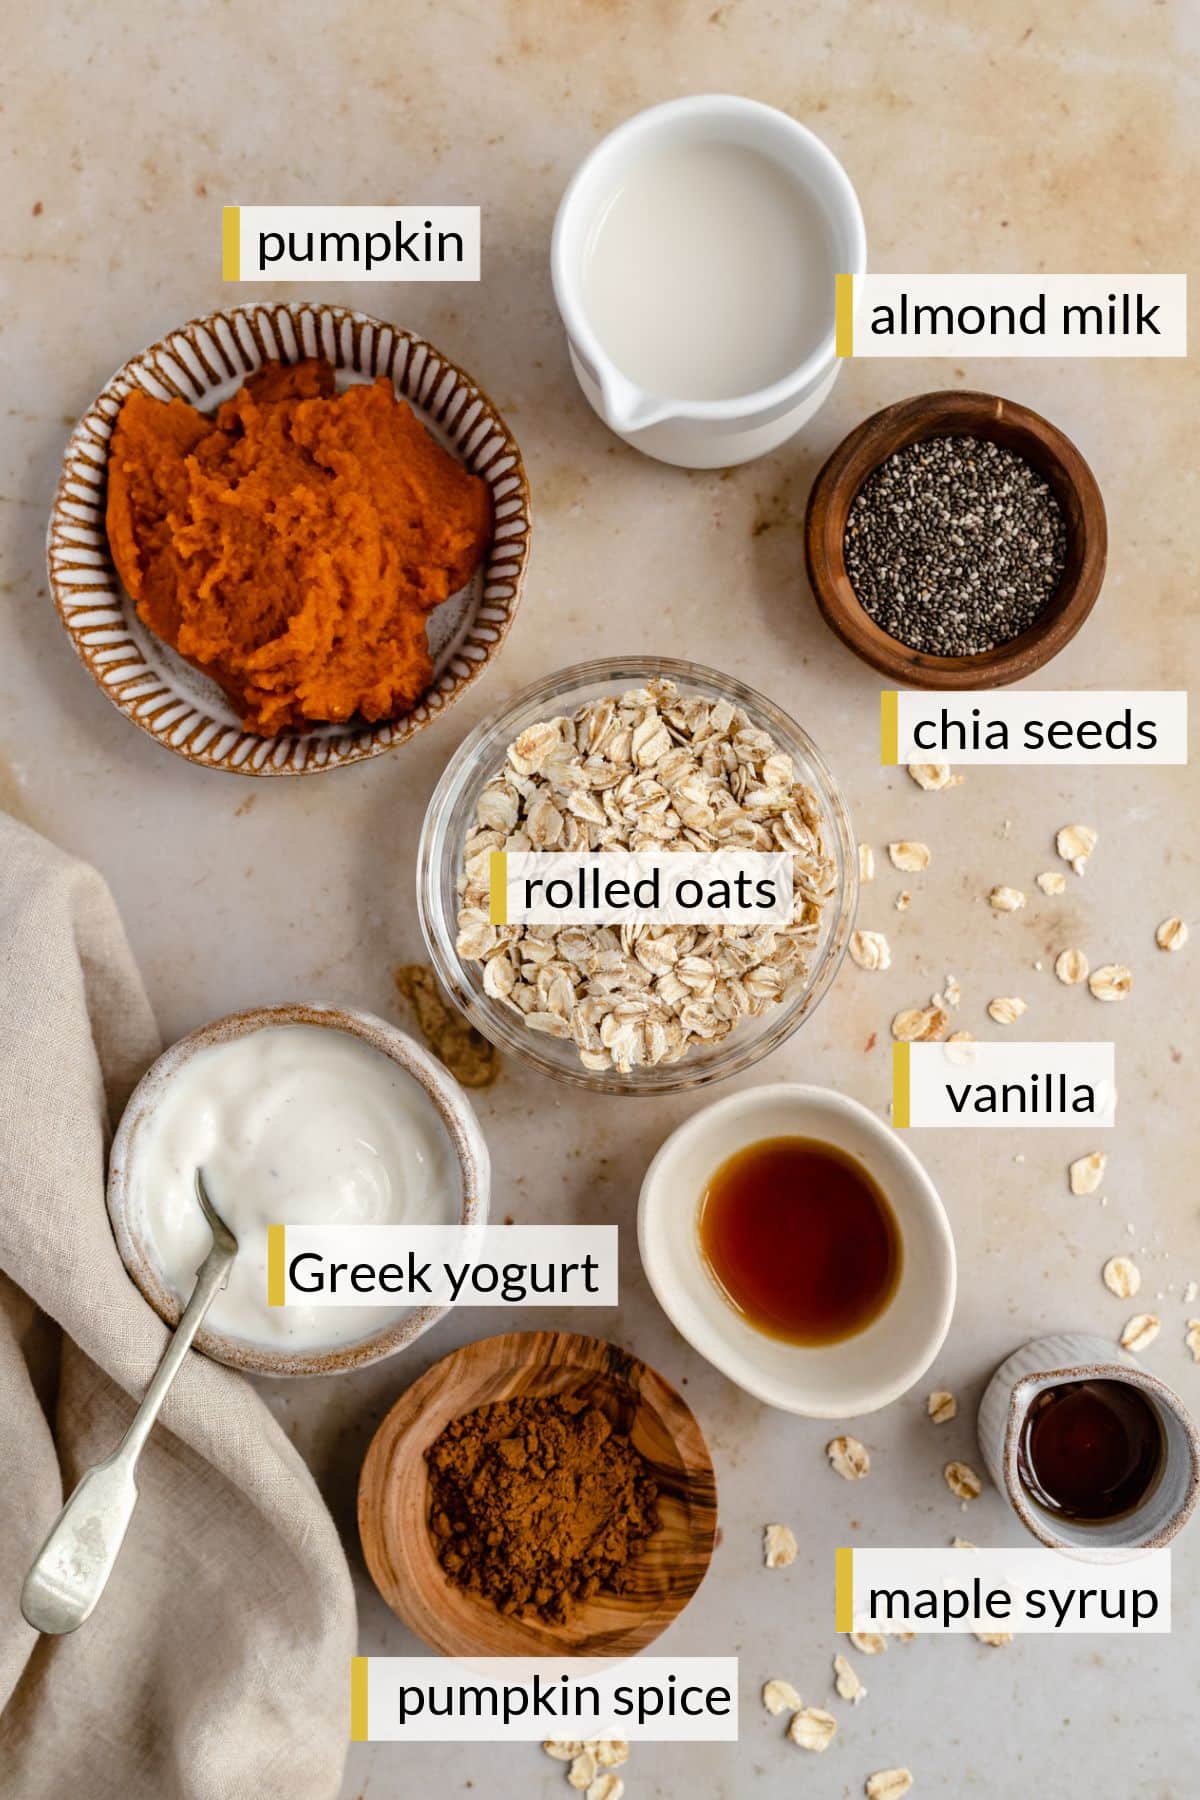 Pumpkin puree, almond milk, oats, greek yogurt, chia seeds and spices divided into small bowls.